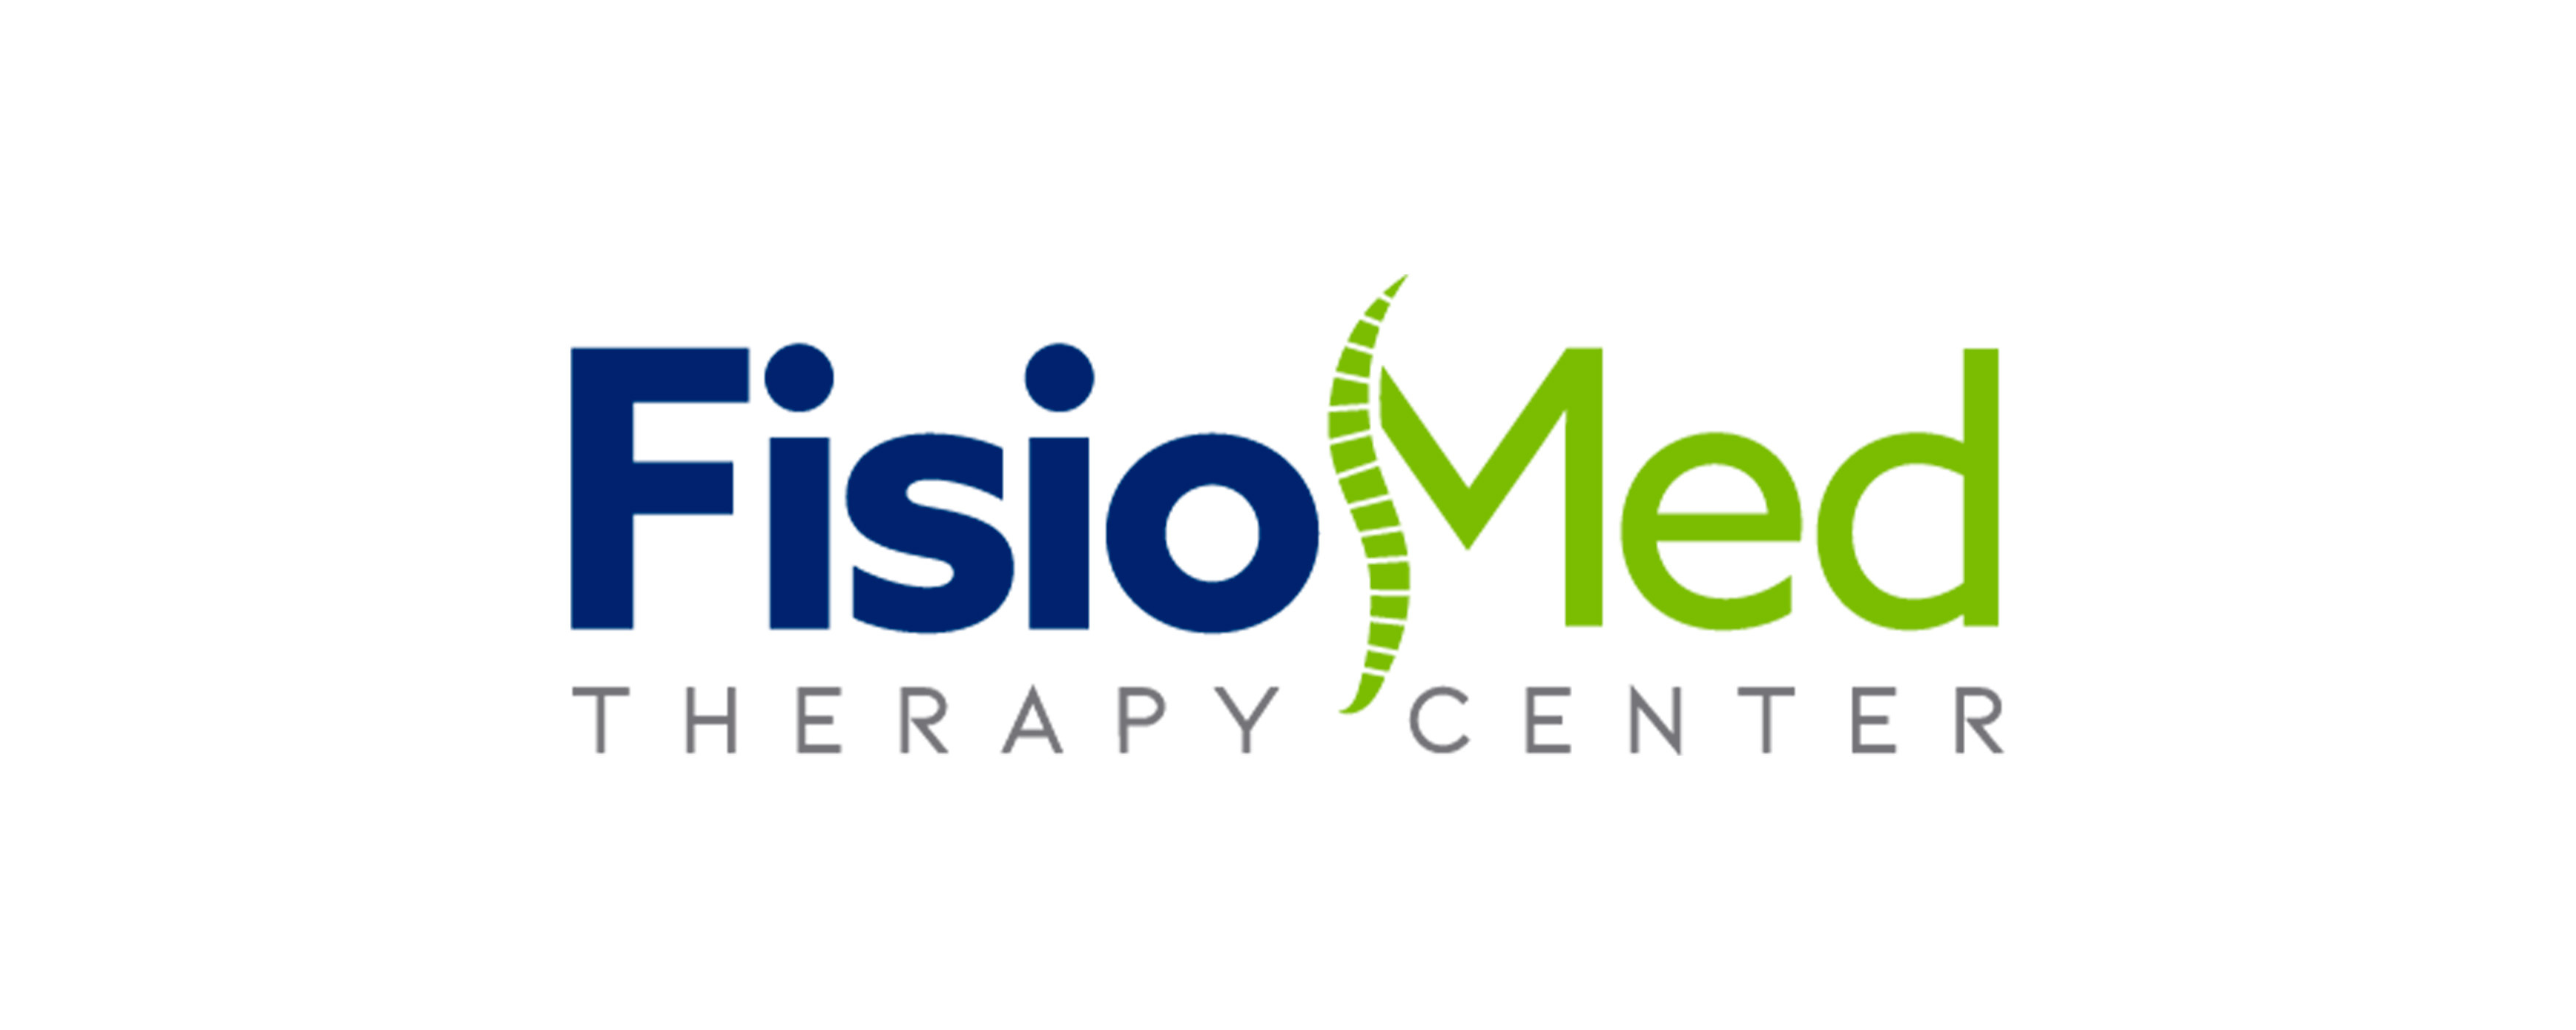 FisioMed Therapy Center